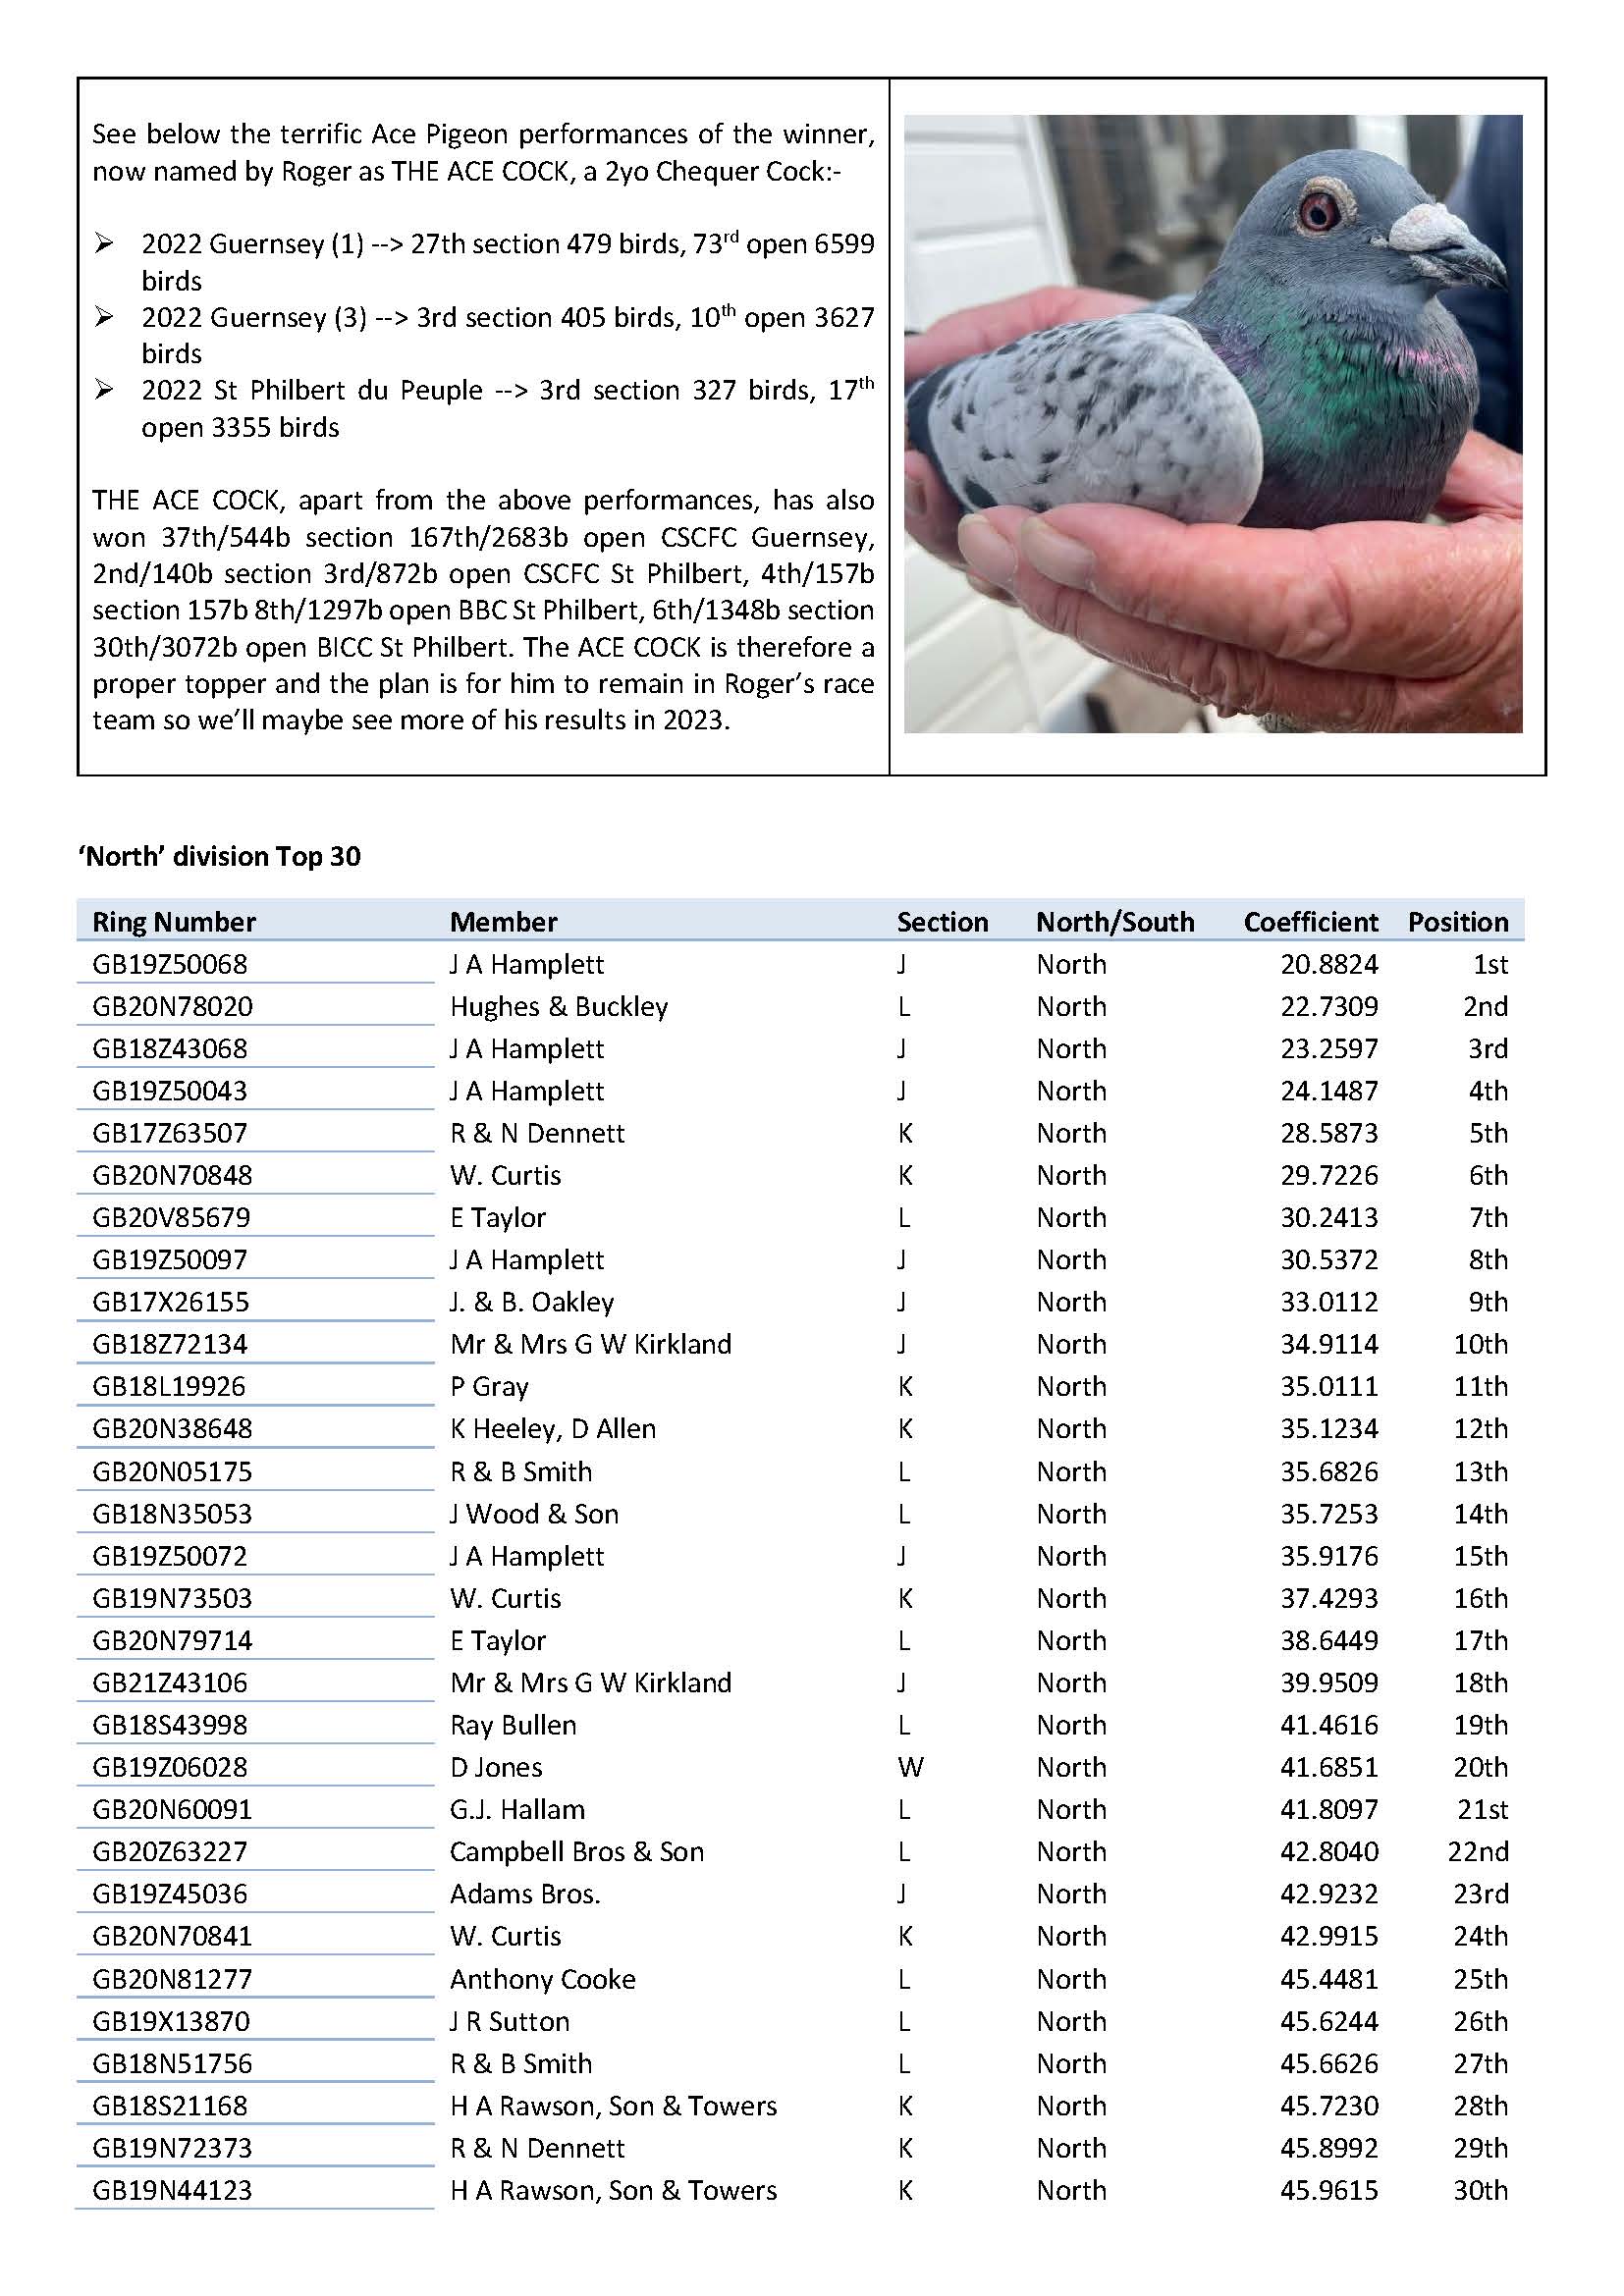 Ace Pigeon Report after 5 races Page 2